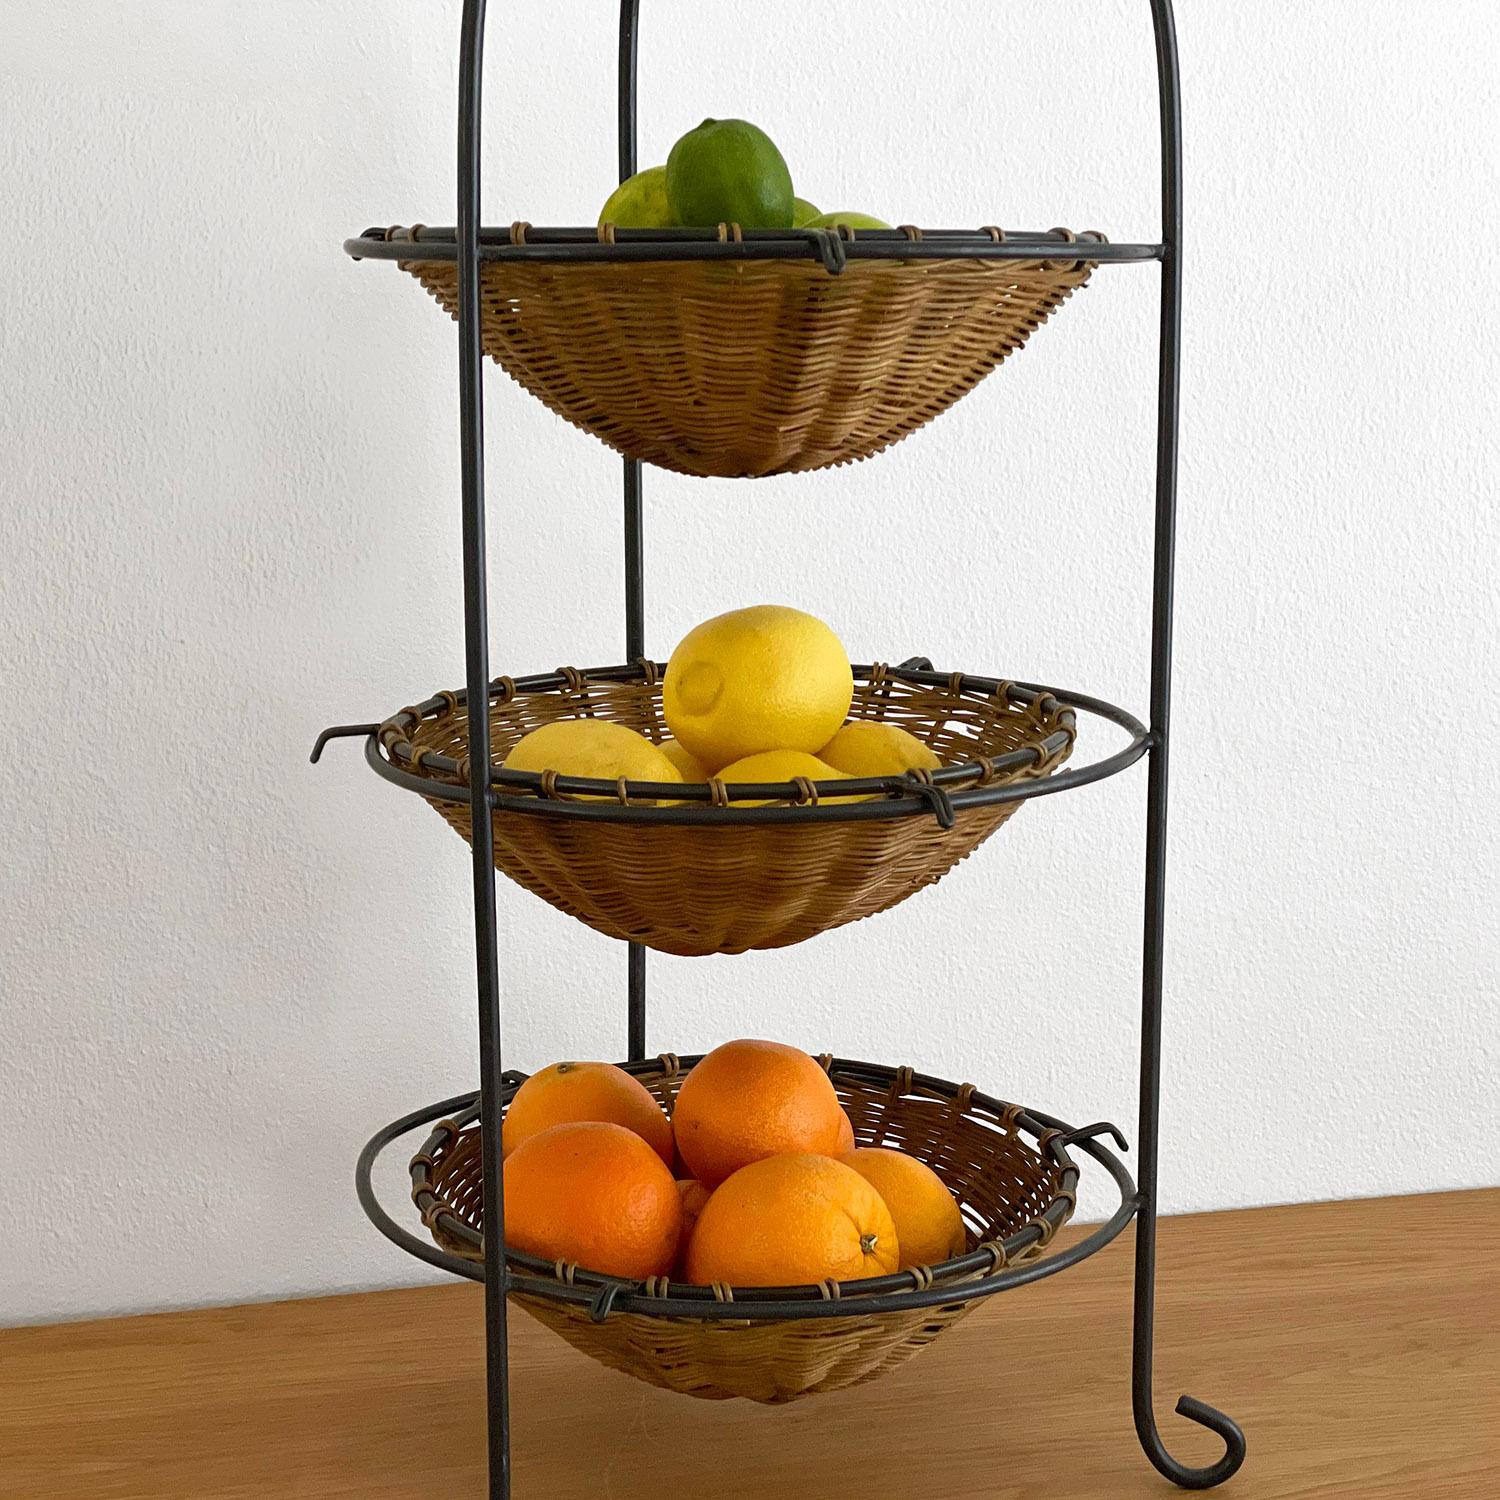 French wicker and iron tiered fruit stand
Consists of three floating baskets and iron frame 
Whimsical curved legs
Some wicker loss to areas below fruit storage
Lovely patina from age and use
Additional photos upon request.